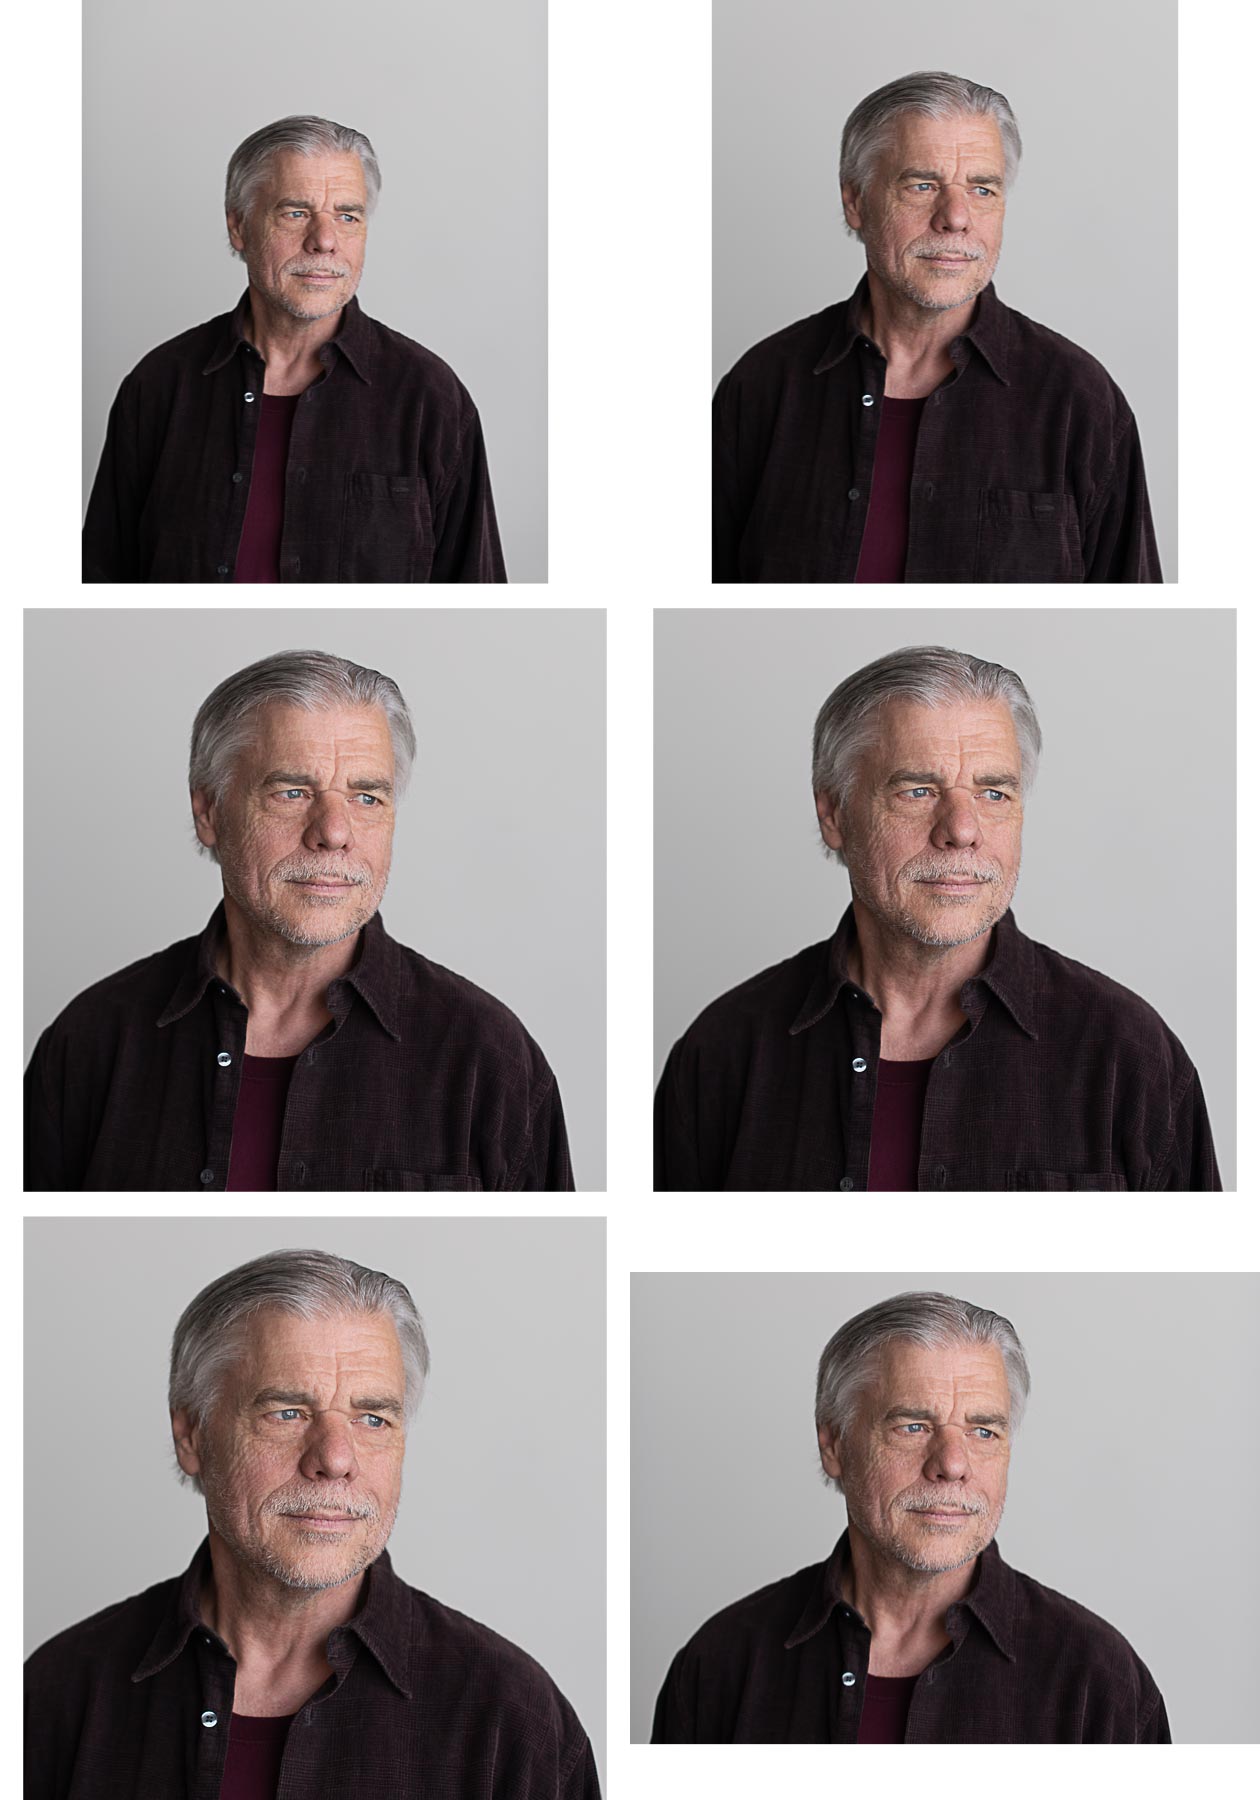 Grid of crops for headshot